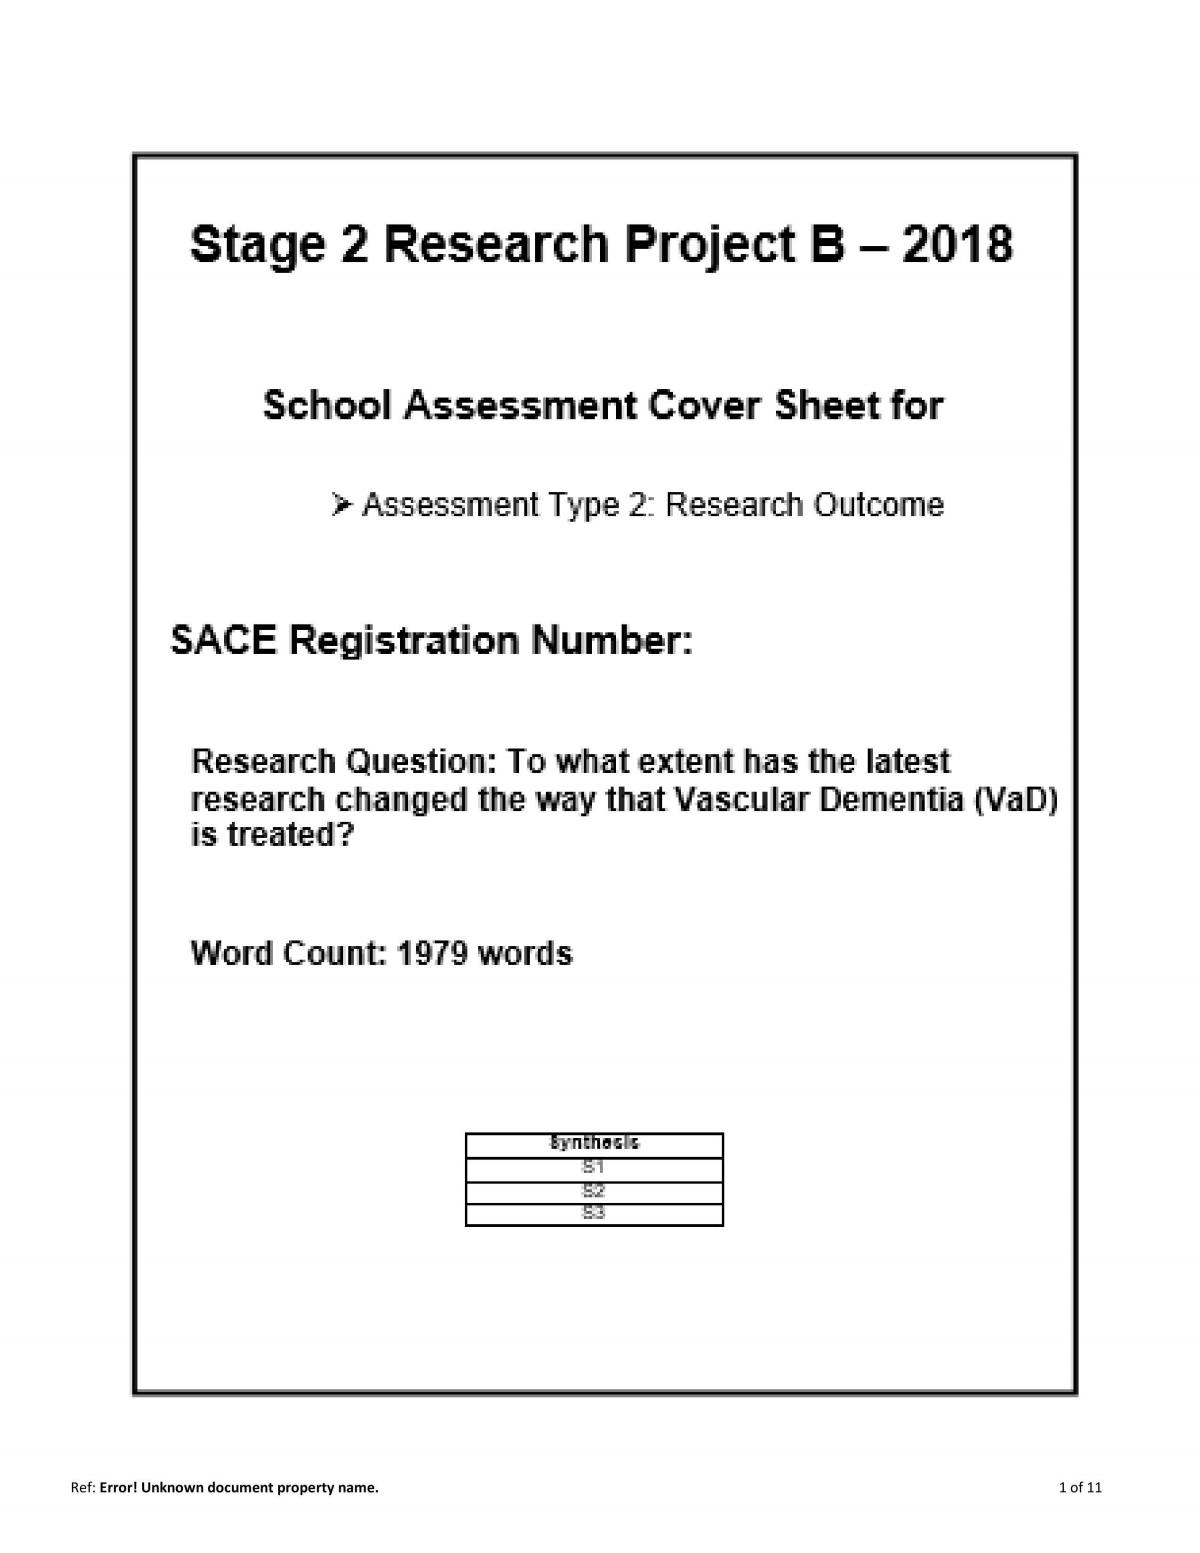 research project review sace